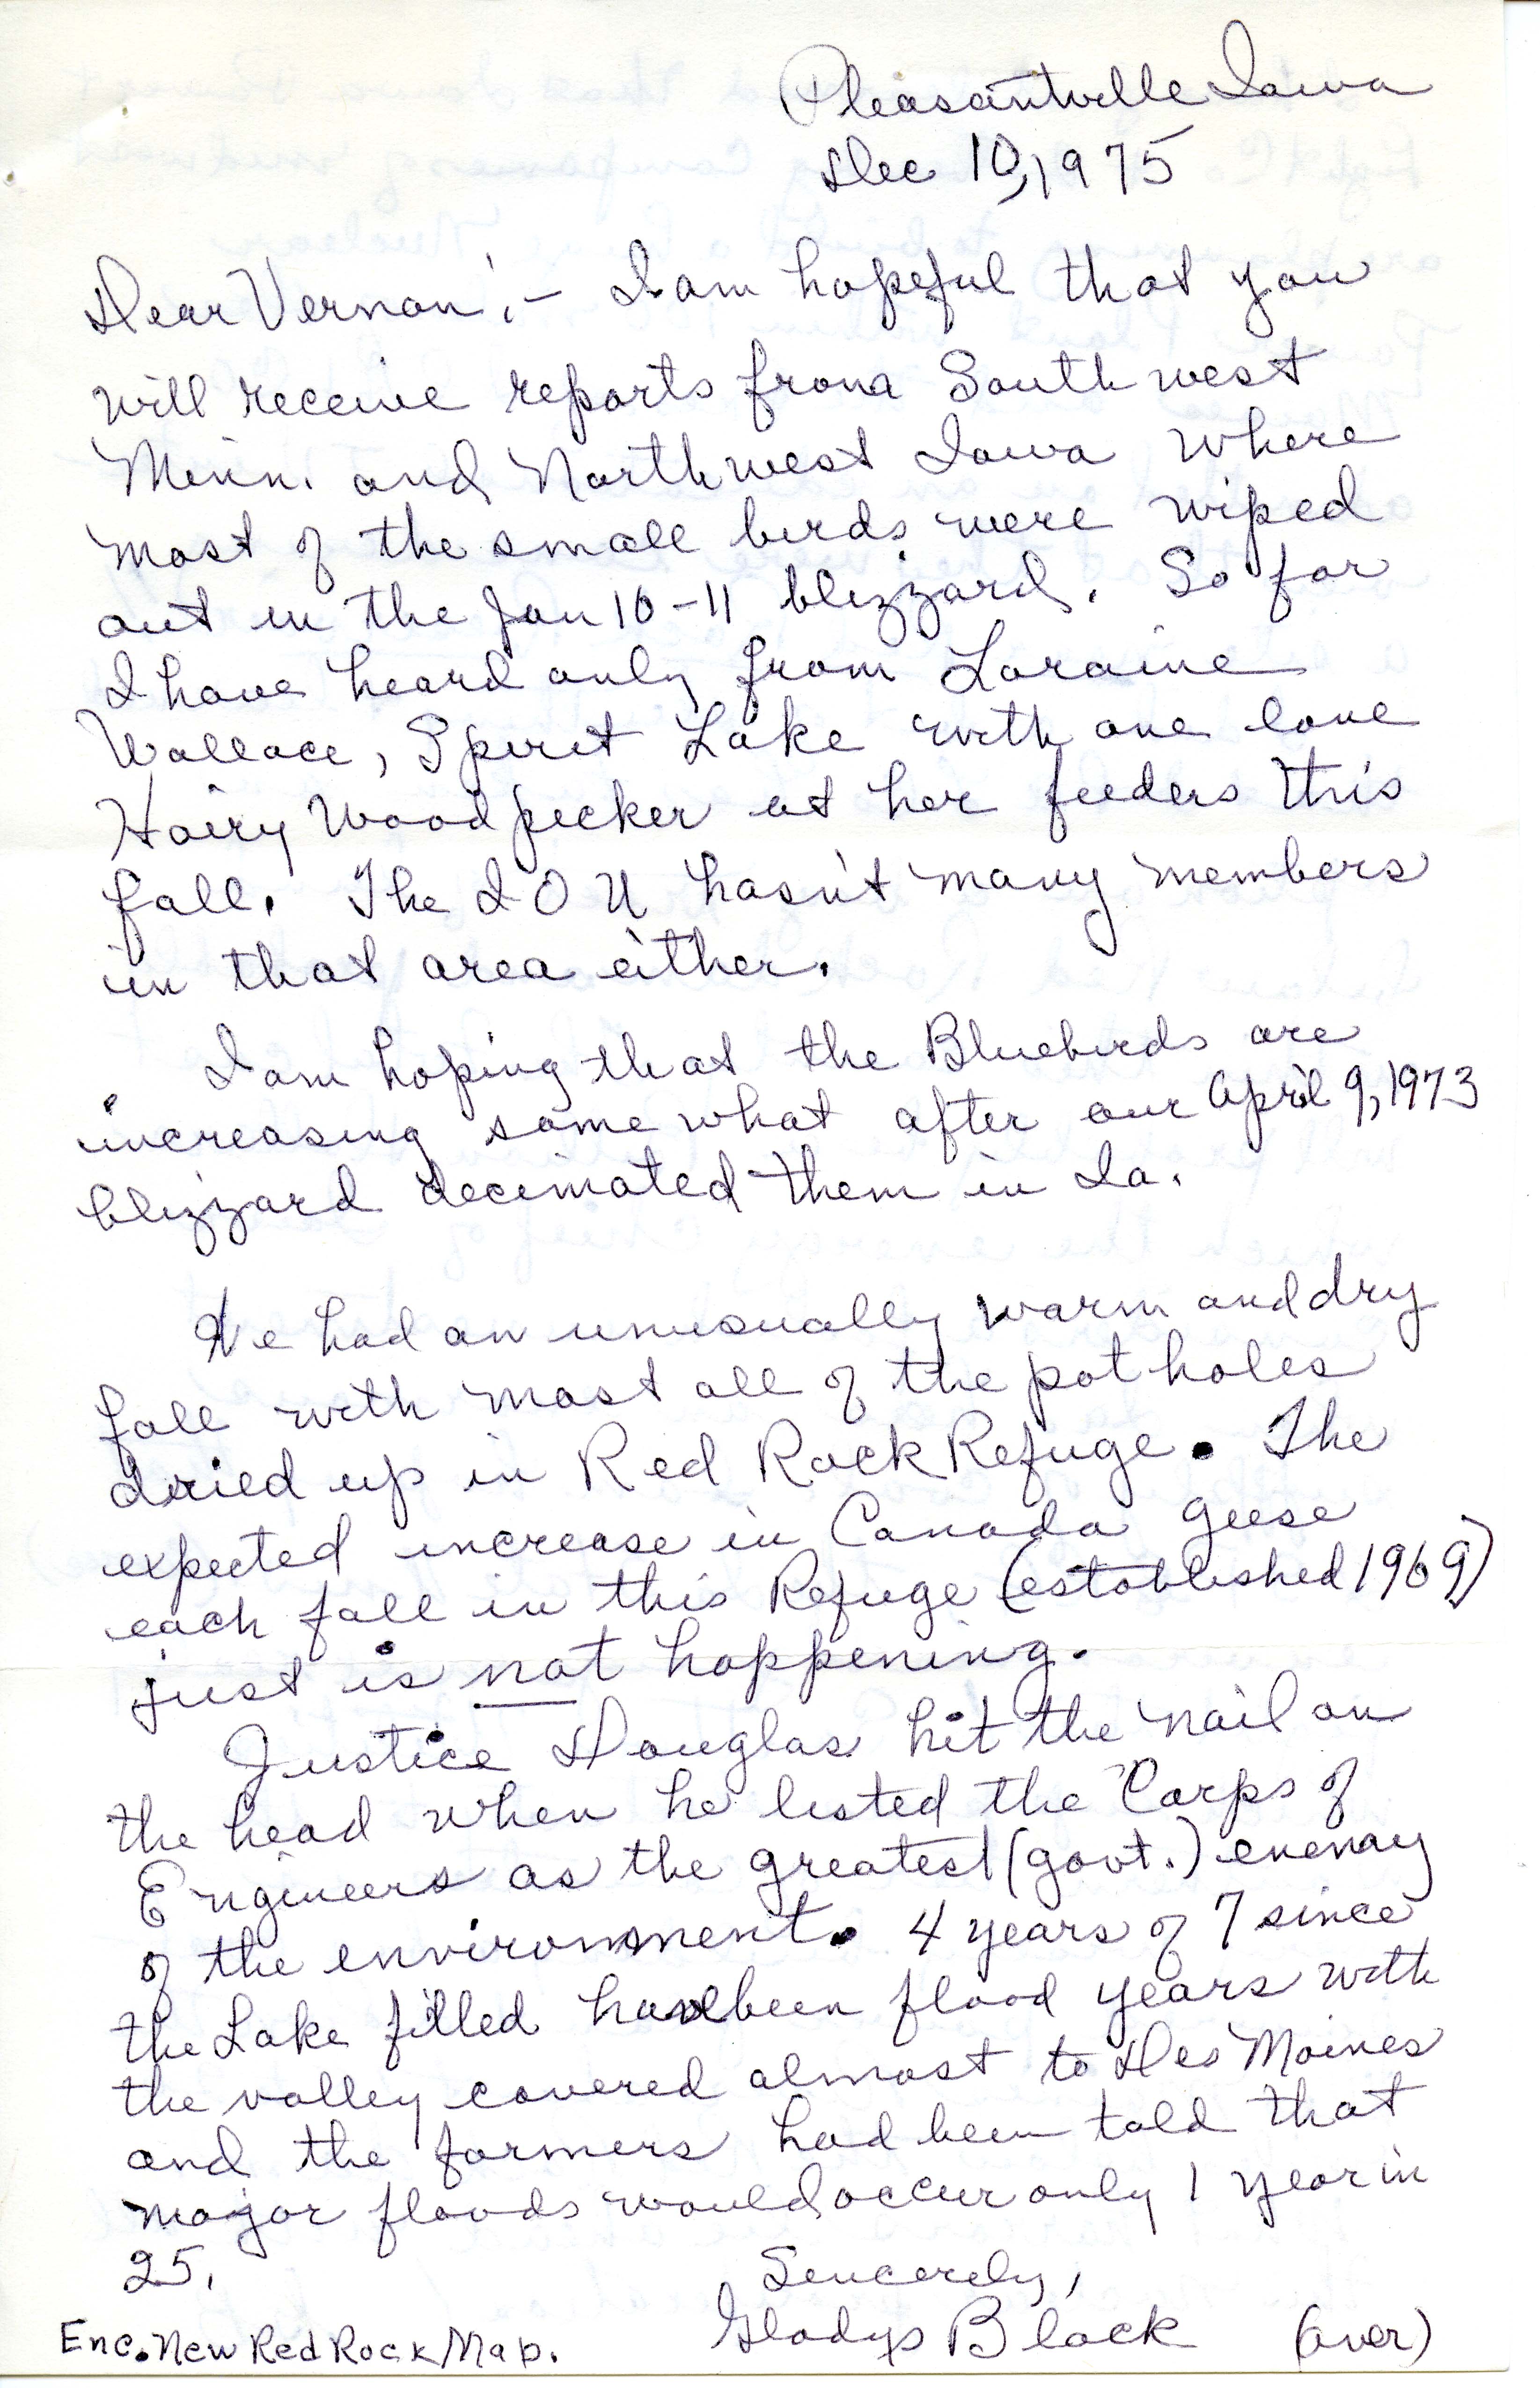 Gladys Black letter, field notes and map to Vernon M. Kleen regarding fall migration, 1975, Red Rock Lake and Refuge, December 10, 1975